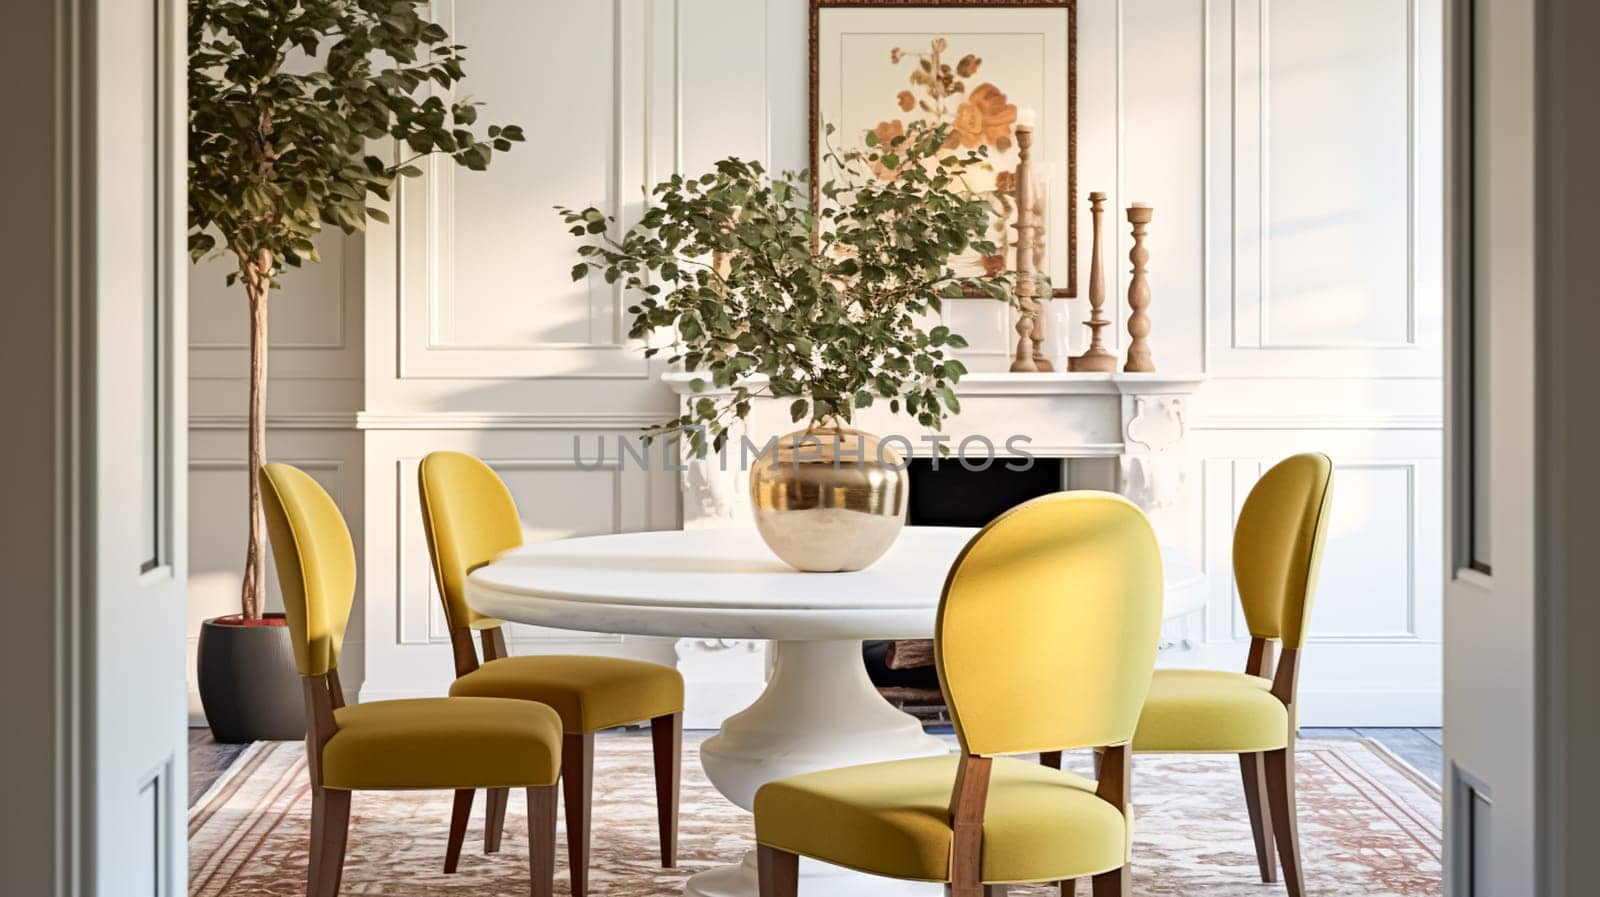 Modern cottage dining room decor, interior design and country house furniture, home decor, table and yellow chairs, English countryside style interiors